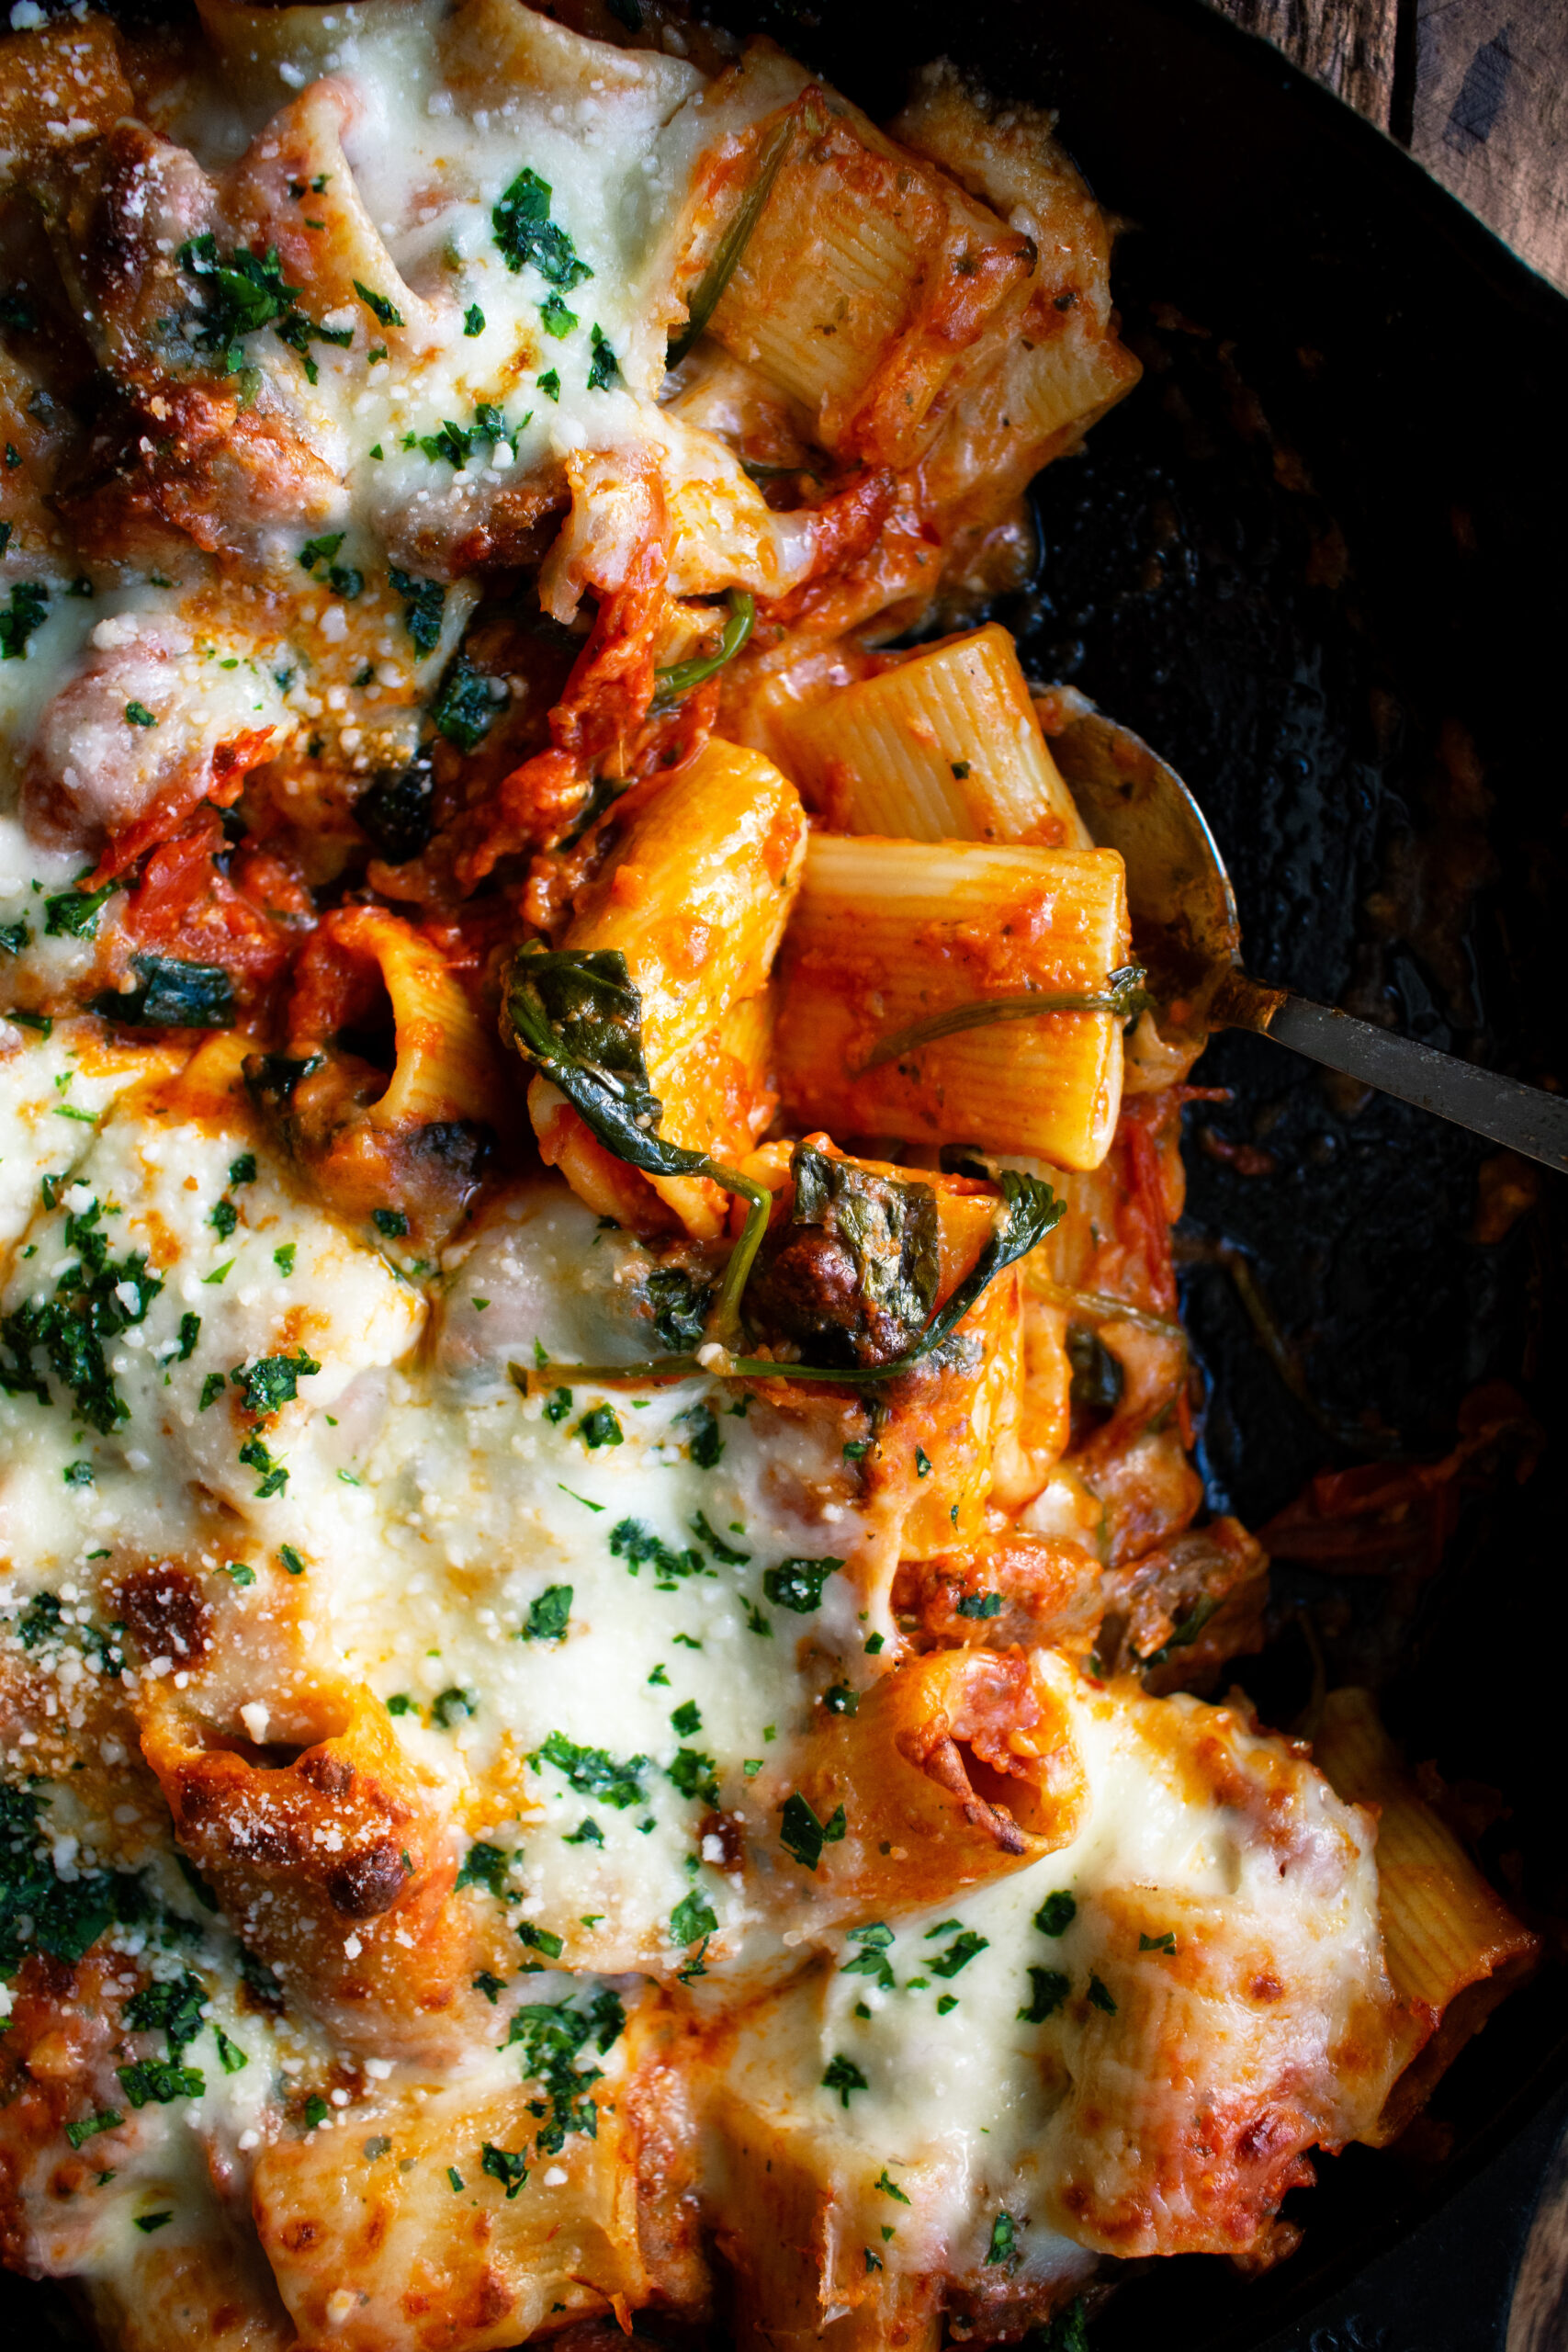 Cheesy Baked Rigatoni with Italian Sausage & Spinach - The Original Dish